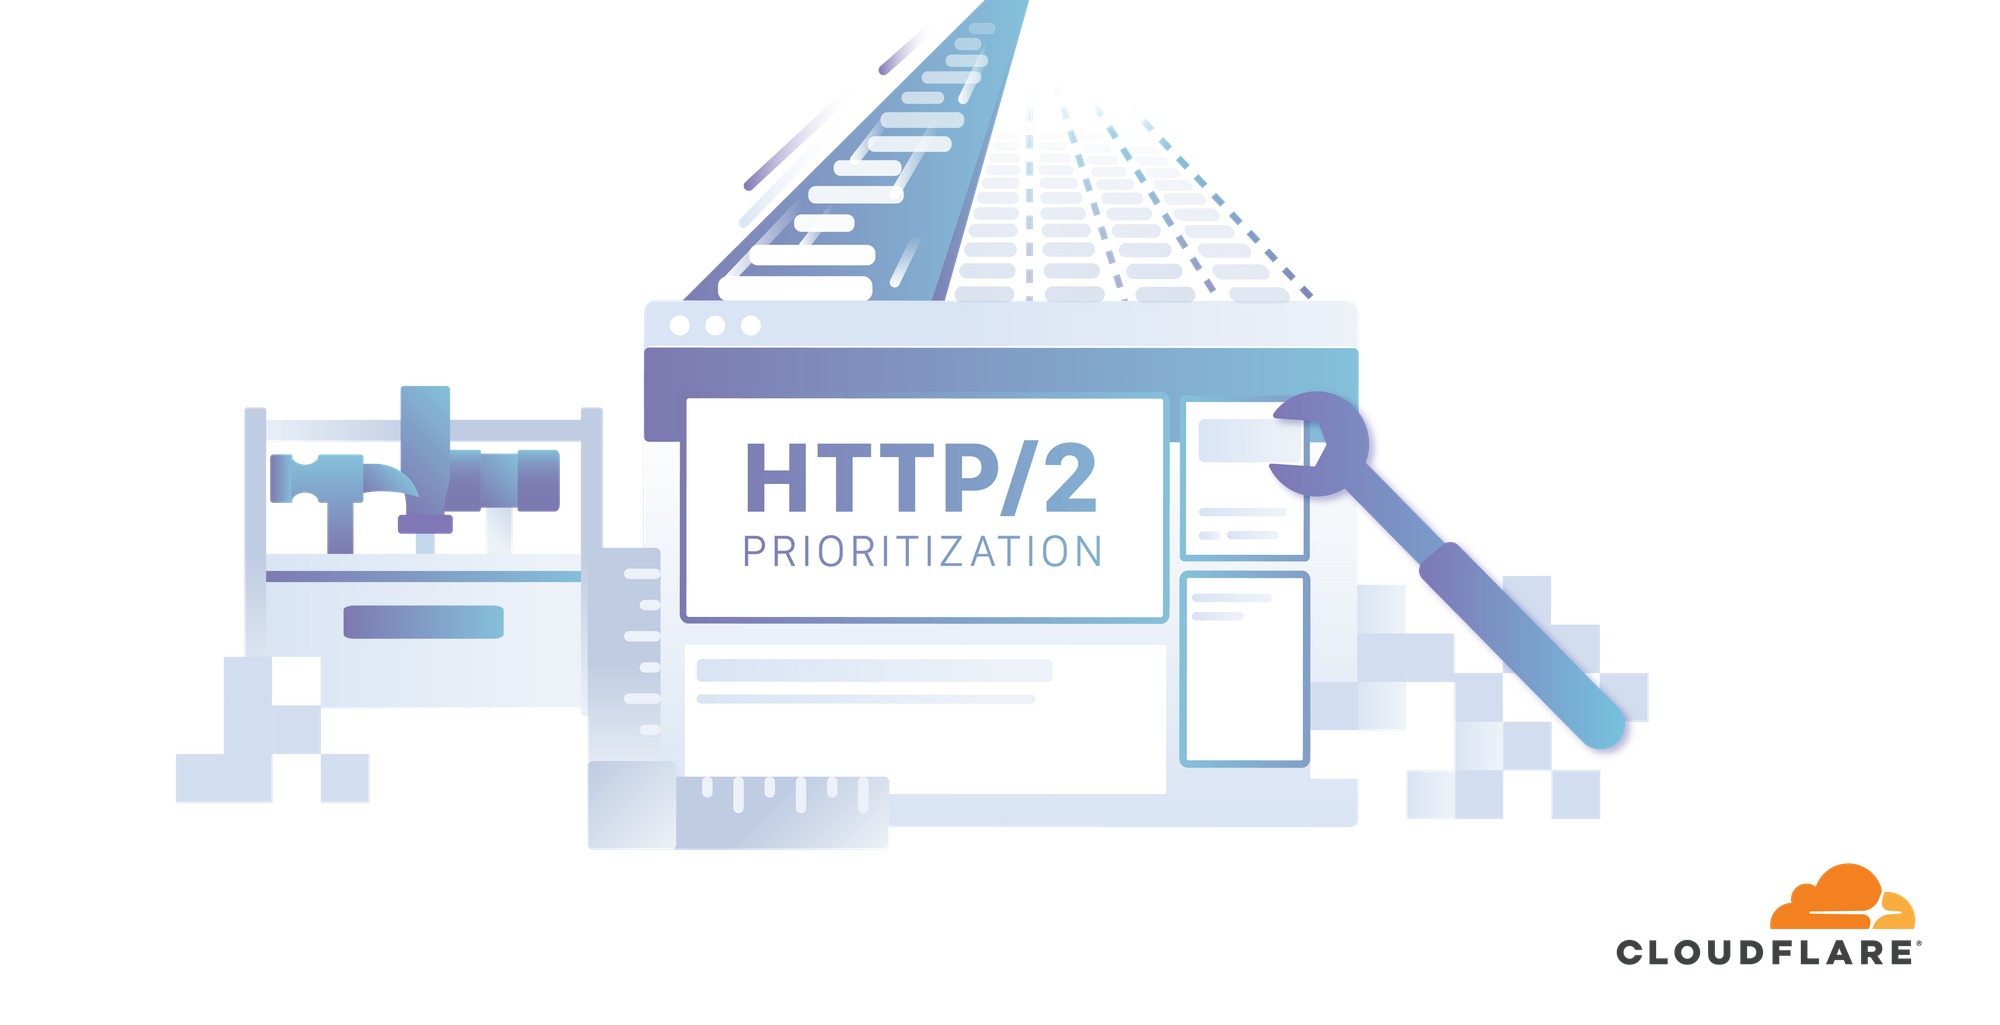 NGINX structural enhancements for HTTP/2 performance